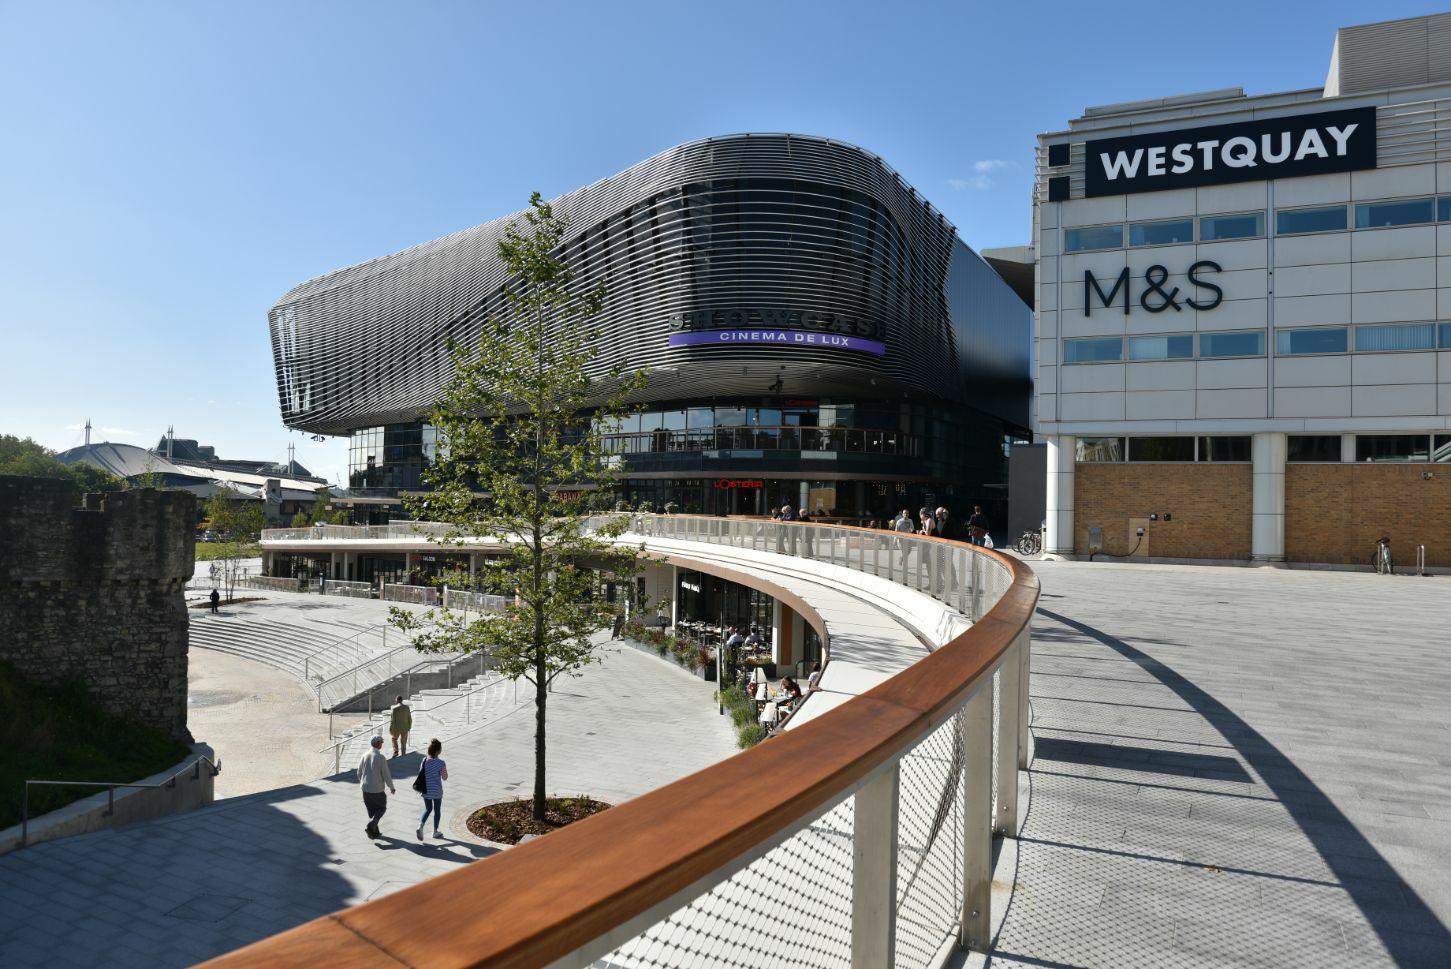 External view of Westquay with large M&S sign